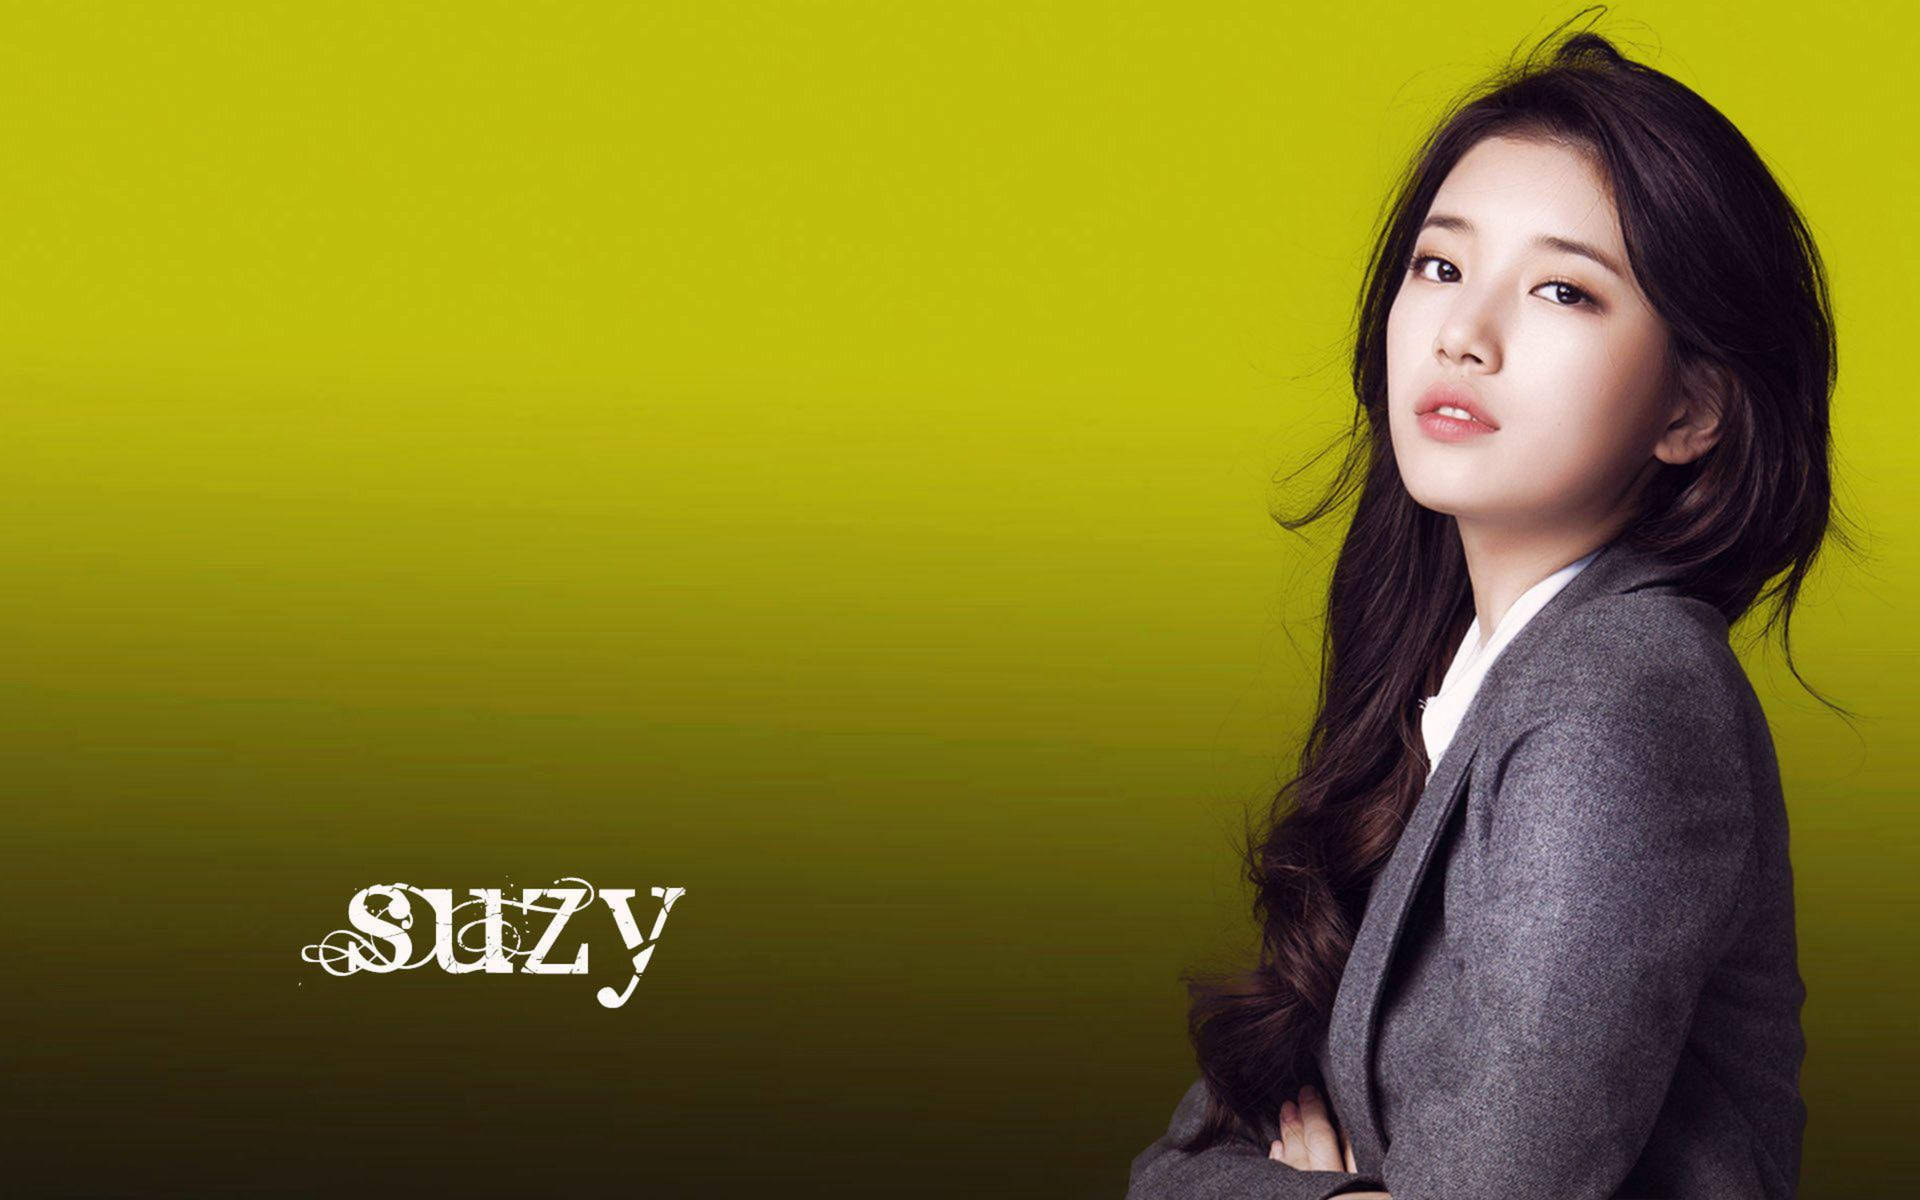 Bae Suzy Portrait With Text Wallpaper